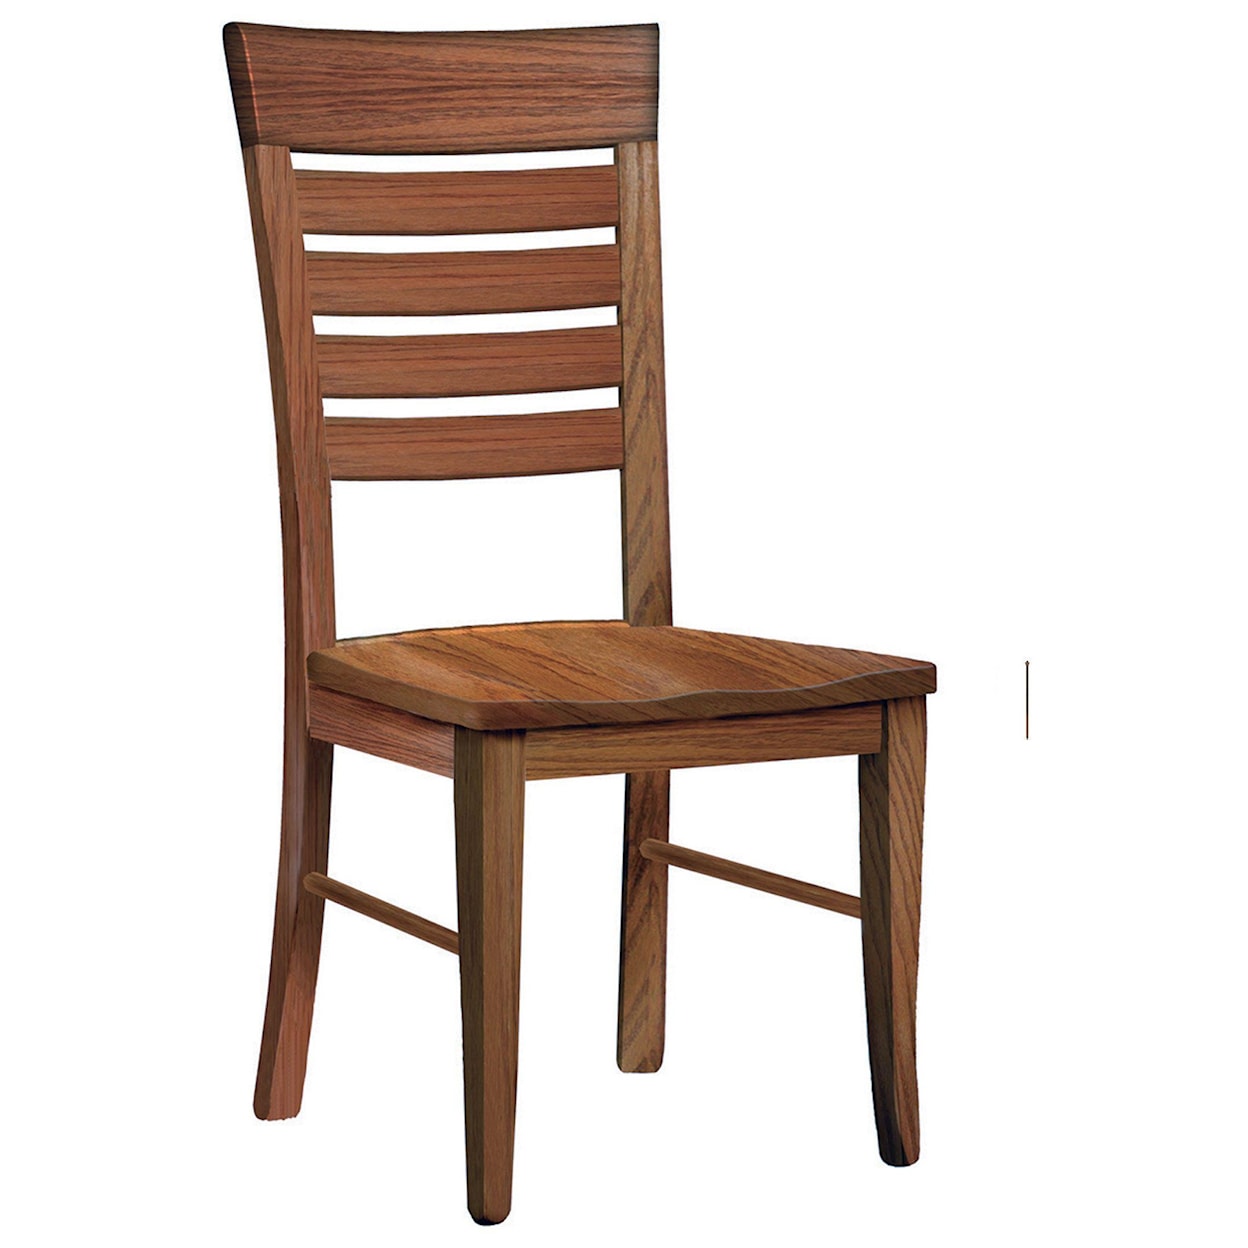 Wengerd Wood Products Mentor-Ladder Side Chair